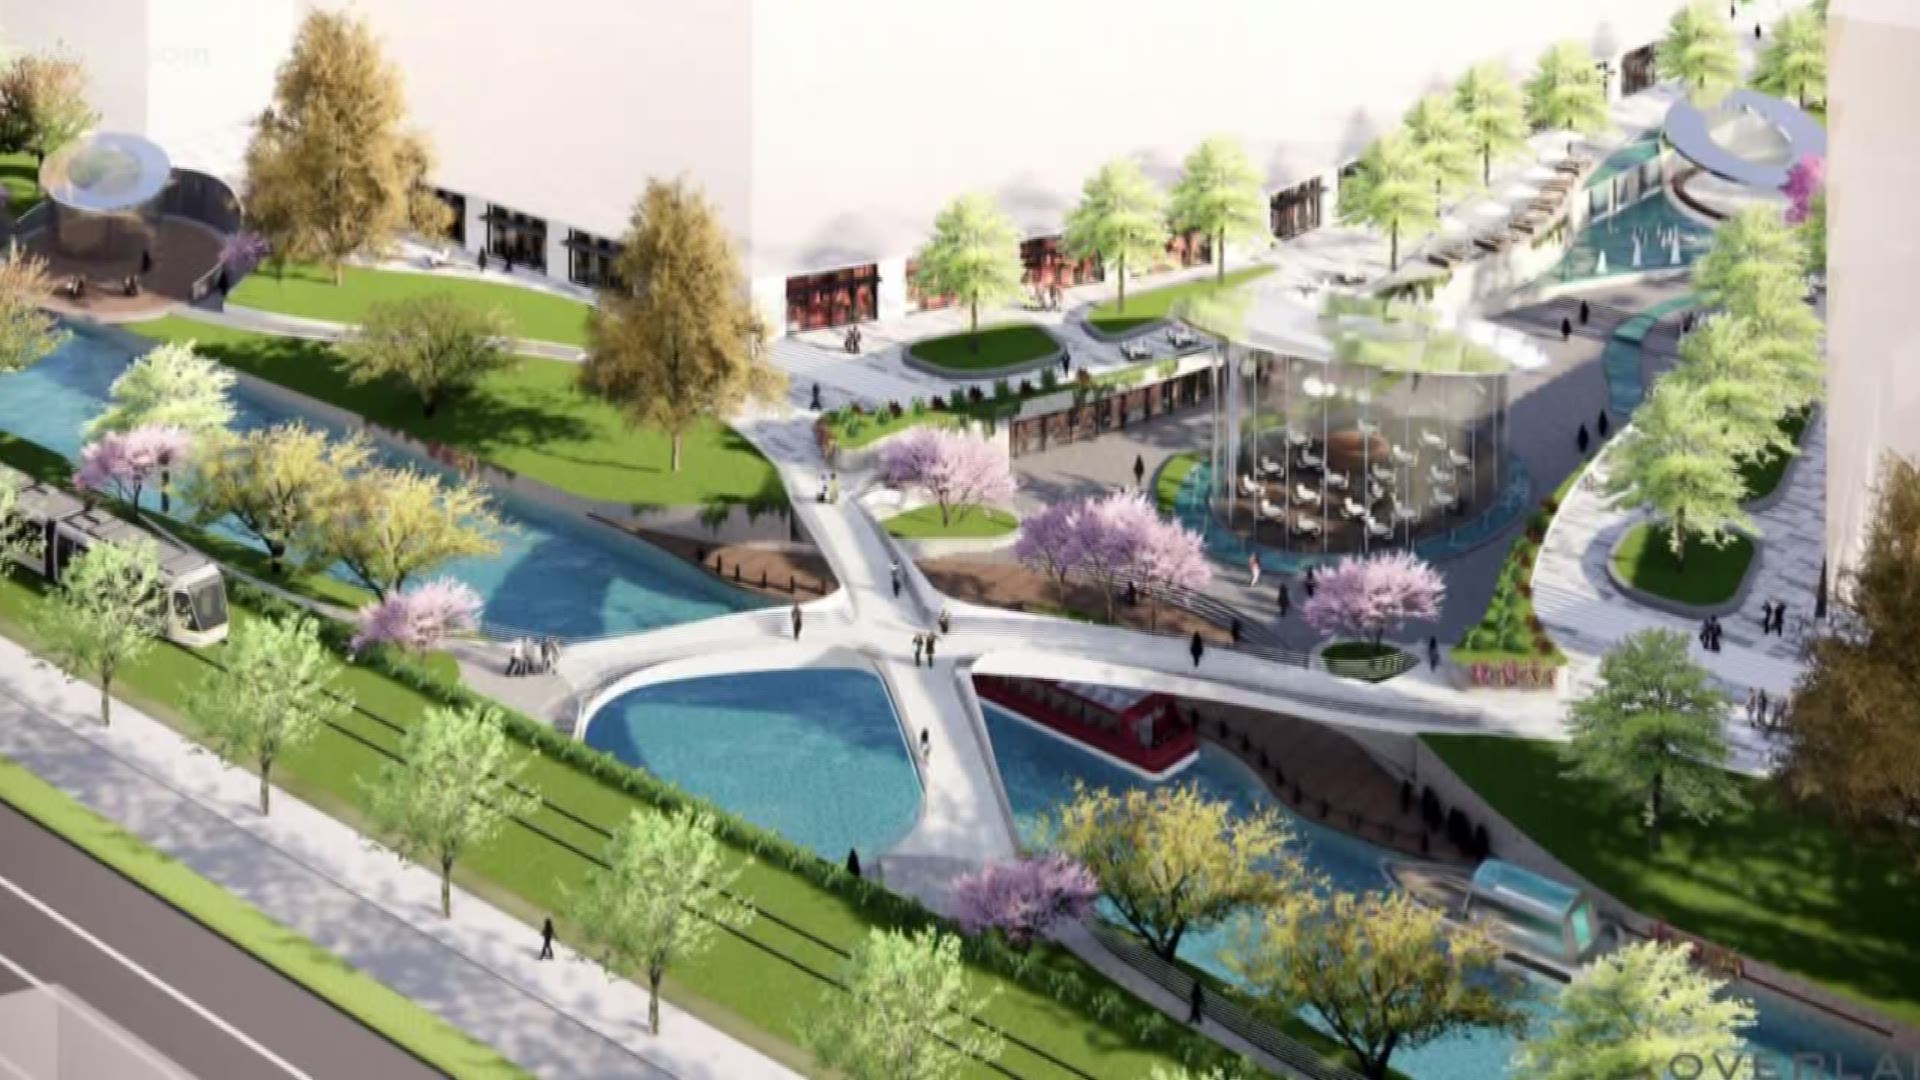 Local architecture firm Overland Partners is helping to breathe new life into a river in Nanjing, China. The development will actually connect three rivers and feature space to live, work, and play. The project is expected to be completed in 2020.